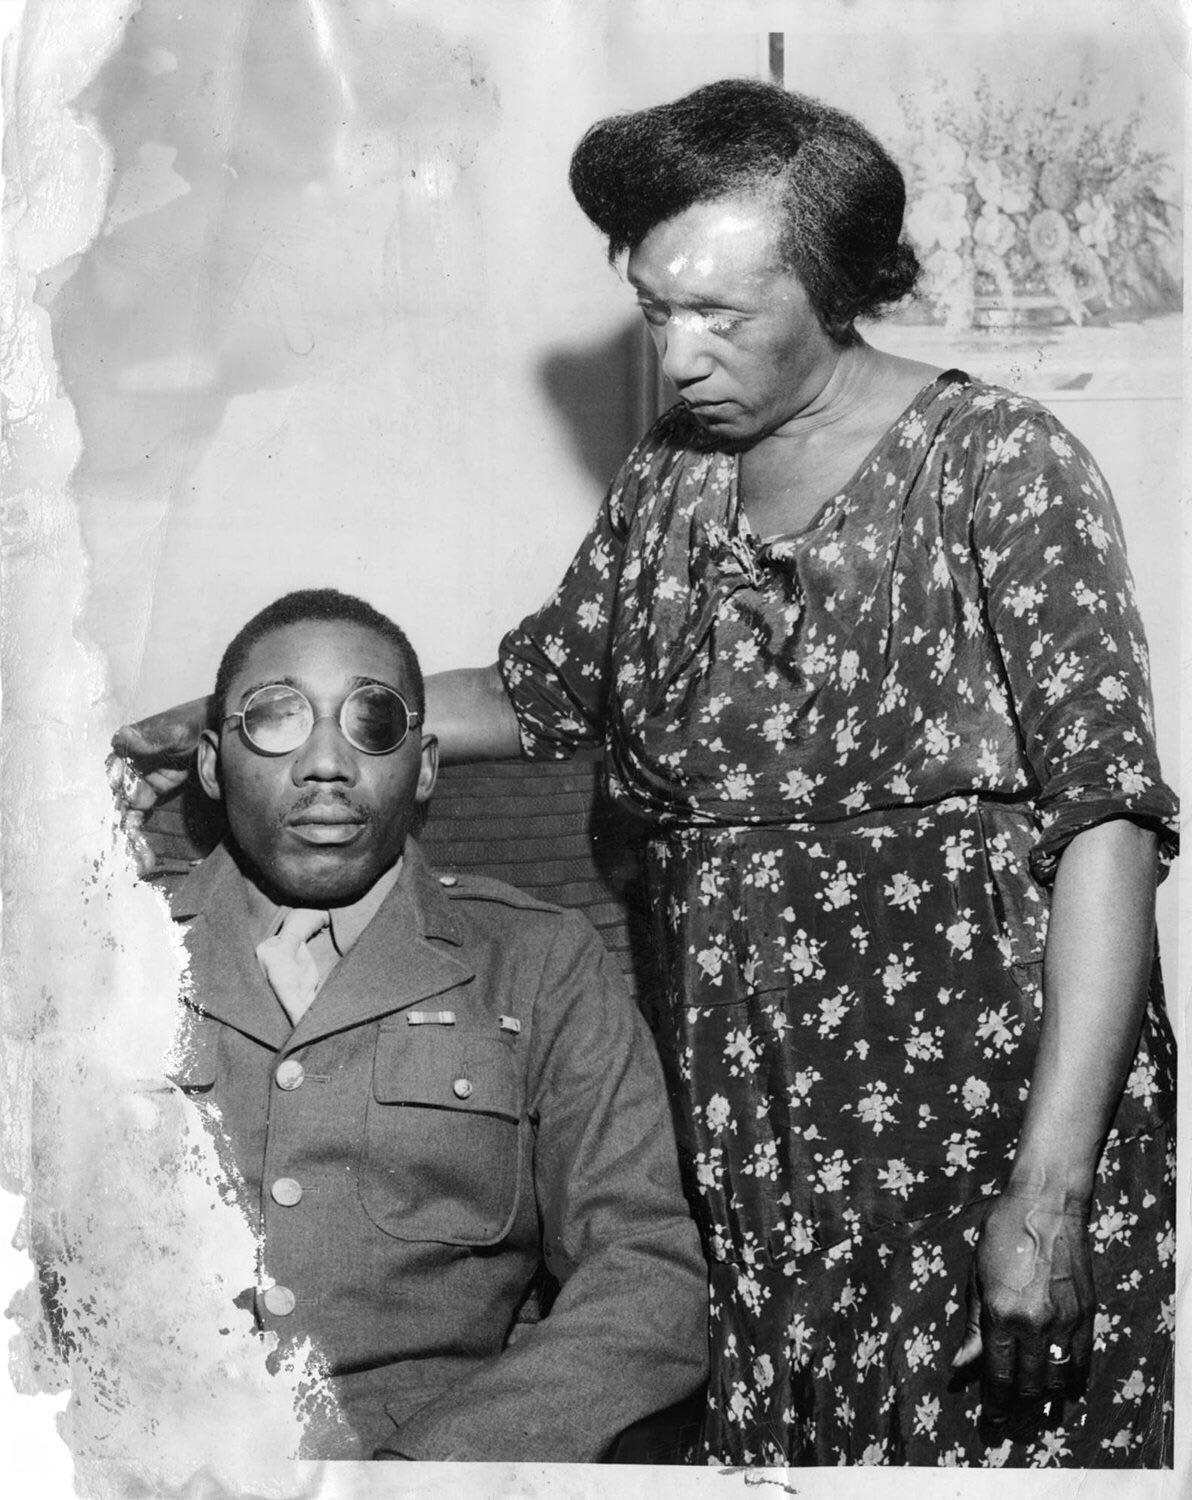 Isaac Woodard with his mother, July 12th, 1946, five months after the World War II veteran was brutally beaten and blinded by a South Carolina police chief while he was en route to rejoin his family shortly after his honourable discharge from the Army on February 12th, 1946.